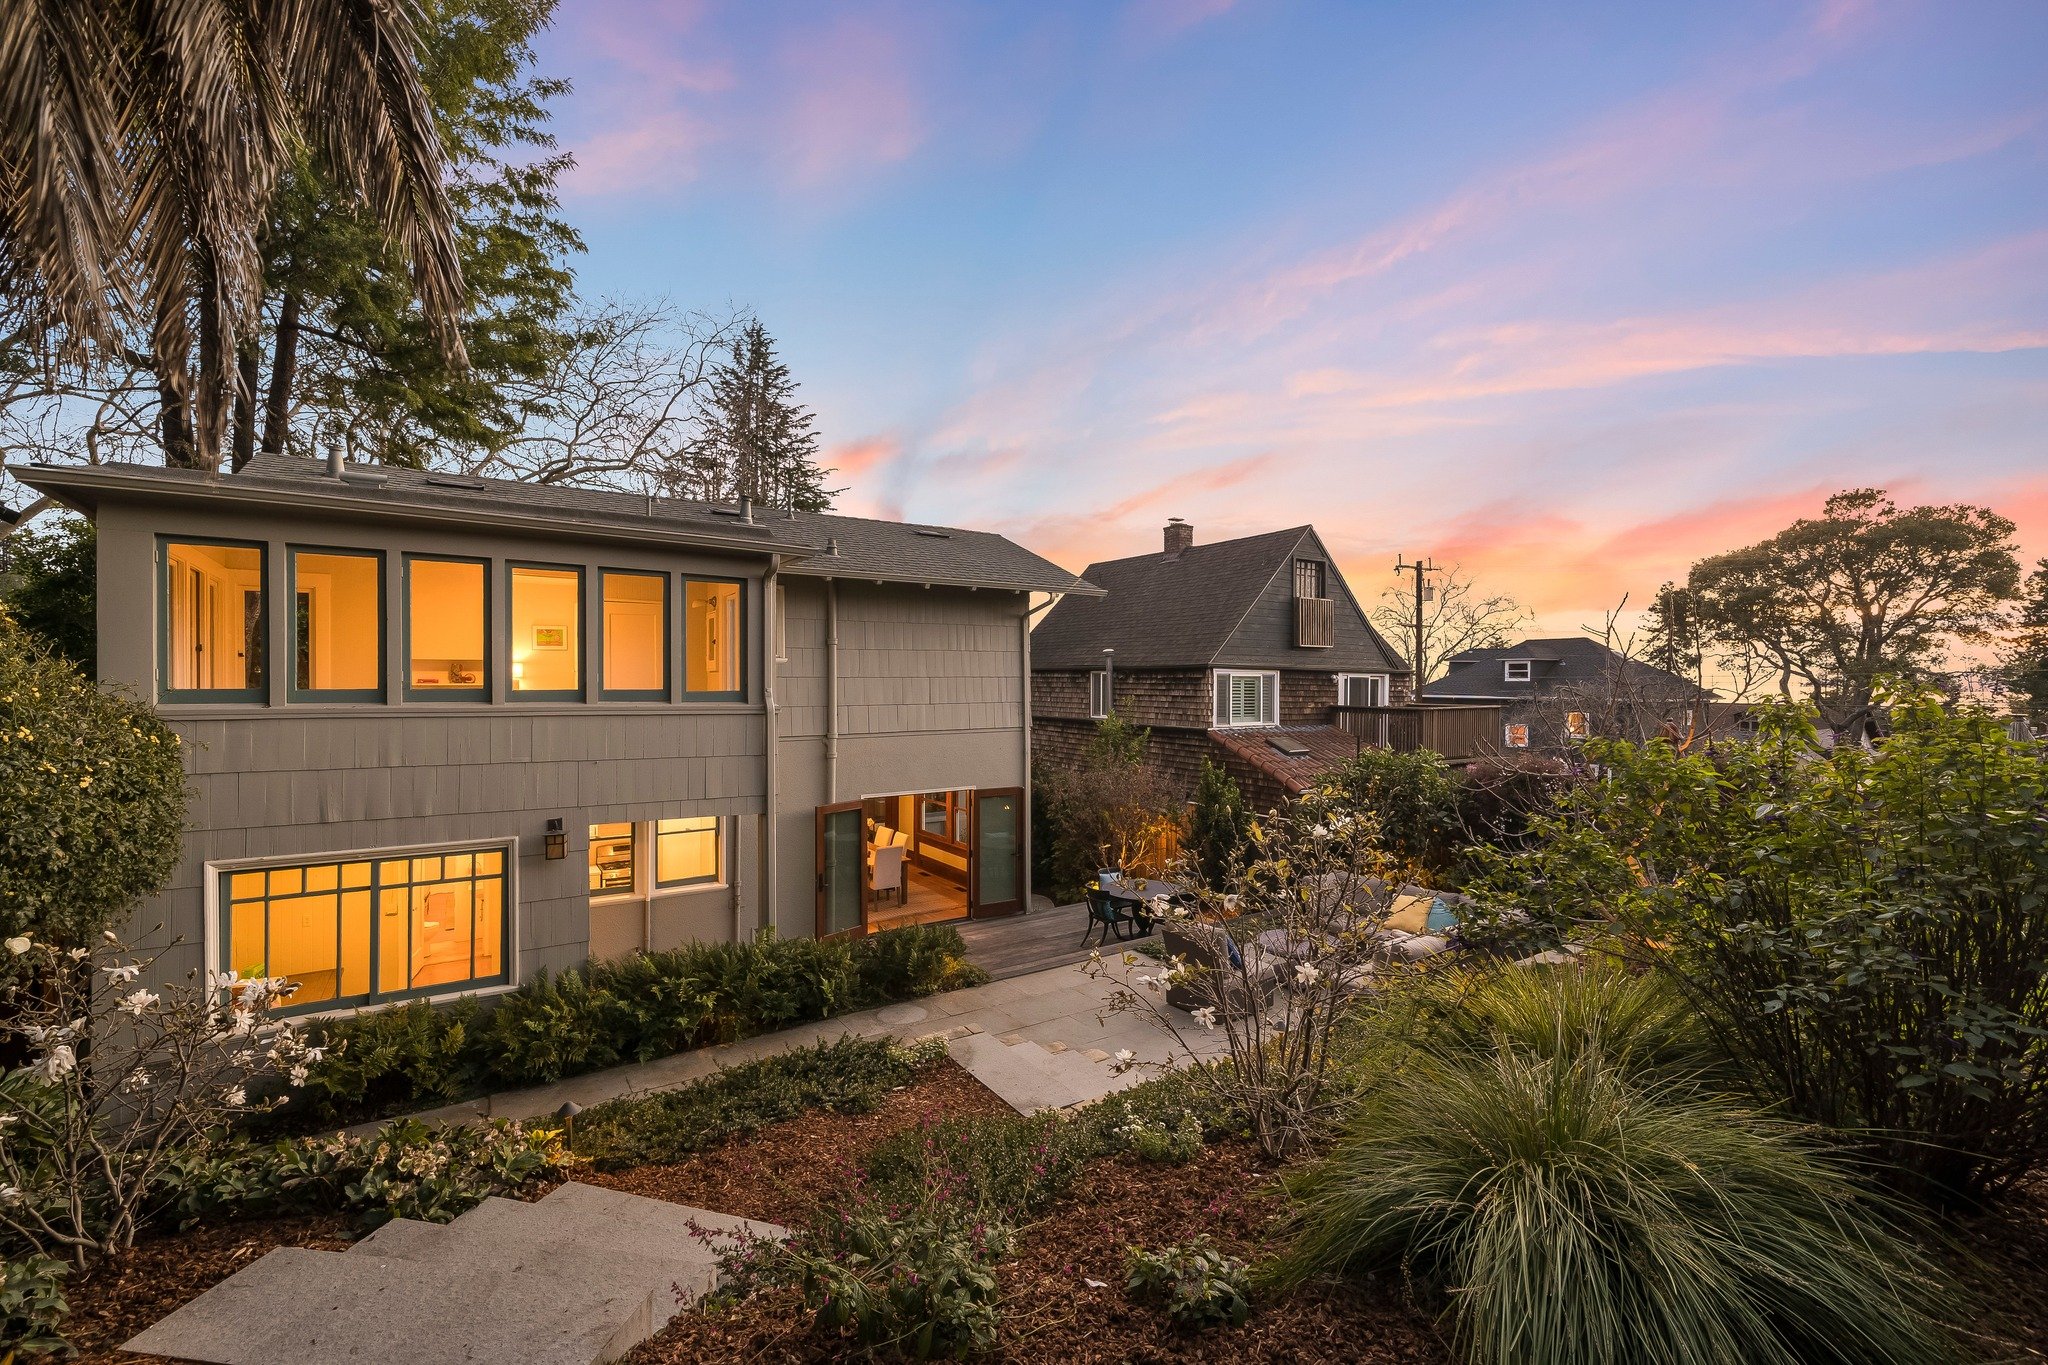 Client Spotlight: Roxanna Ahlbach, Red Oak Realty

Classic Craftsman charm set in a spectacular garden setting, the ultimate indoor-outdoor living. Quality period details and beautiful light-filled rooms greet you upon entry to this welcoming North B